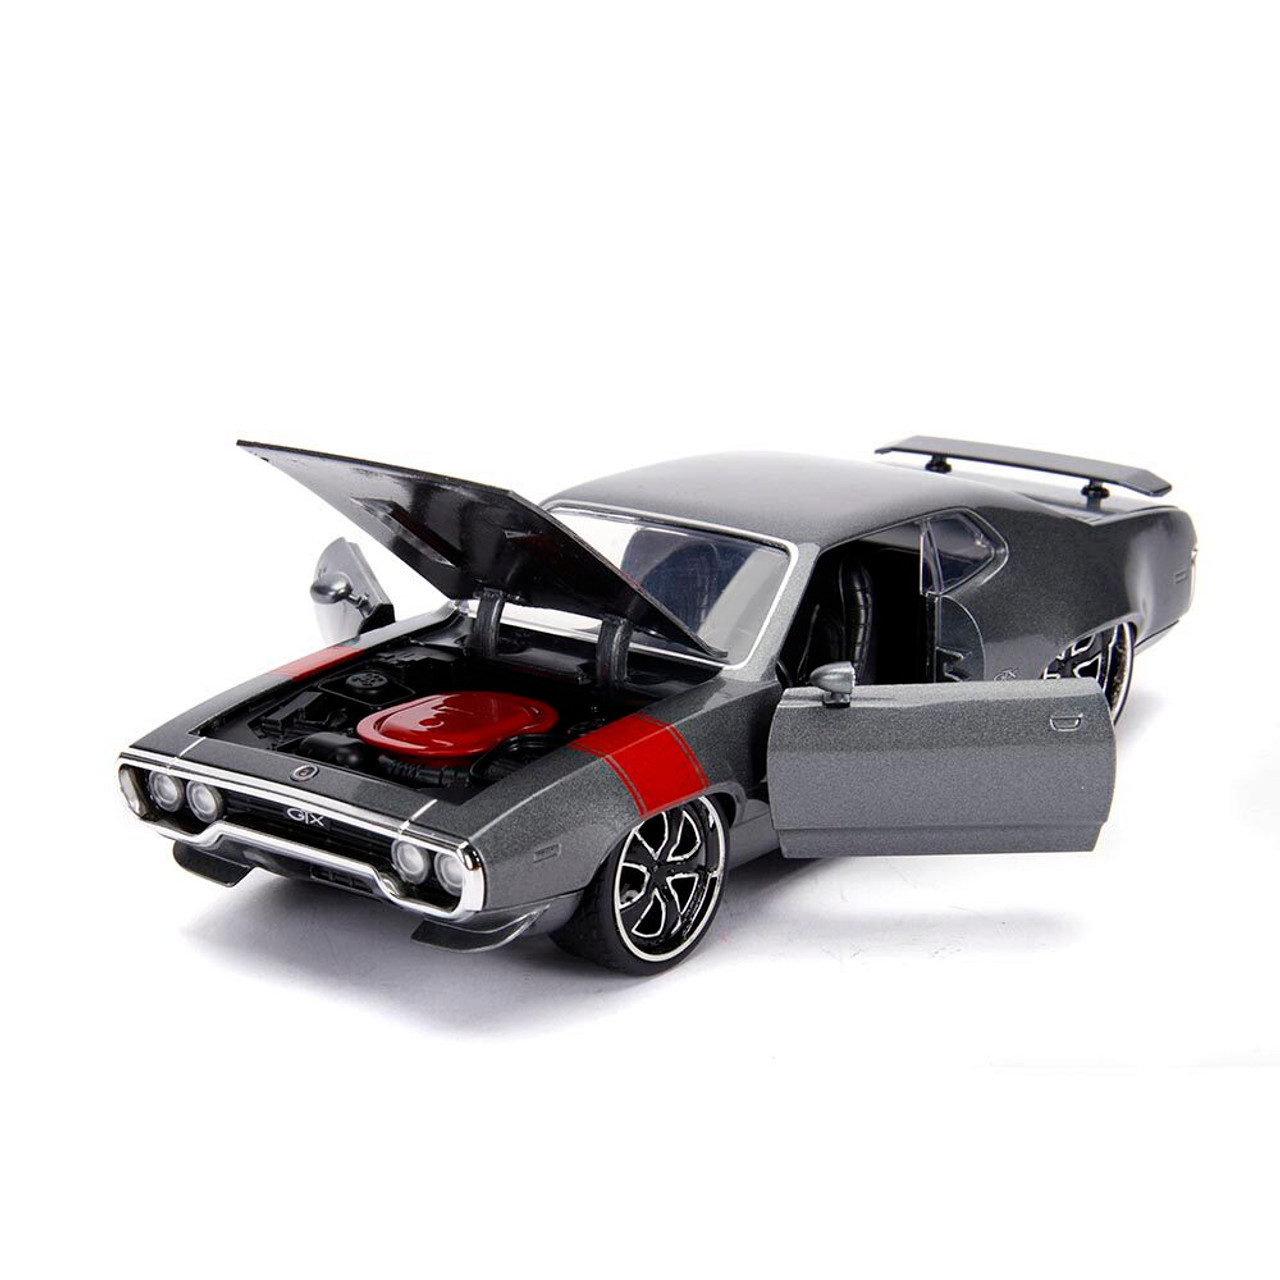 1972 Plymouth GTX 440 Metallic Gray with Red Stripe Bigtime Muscle 1/24 Diecast Model Car by Jada